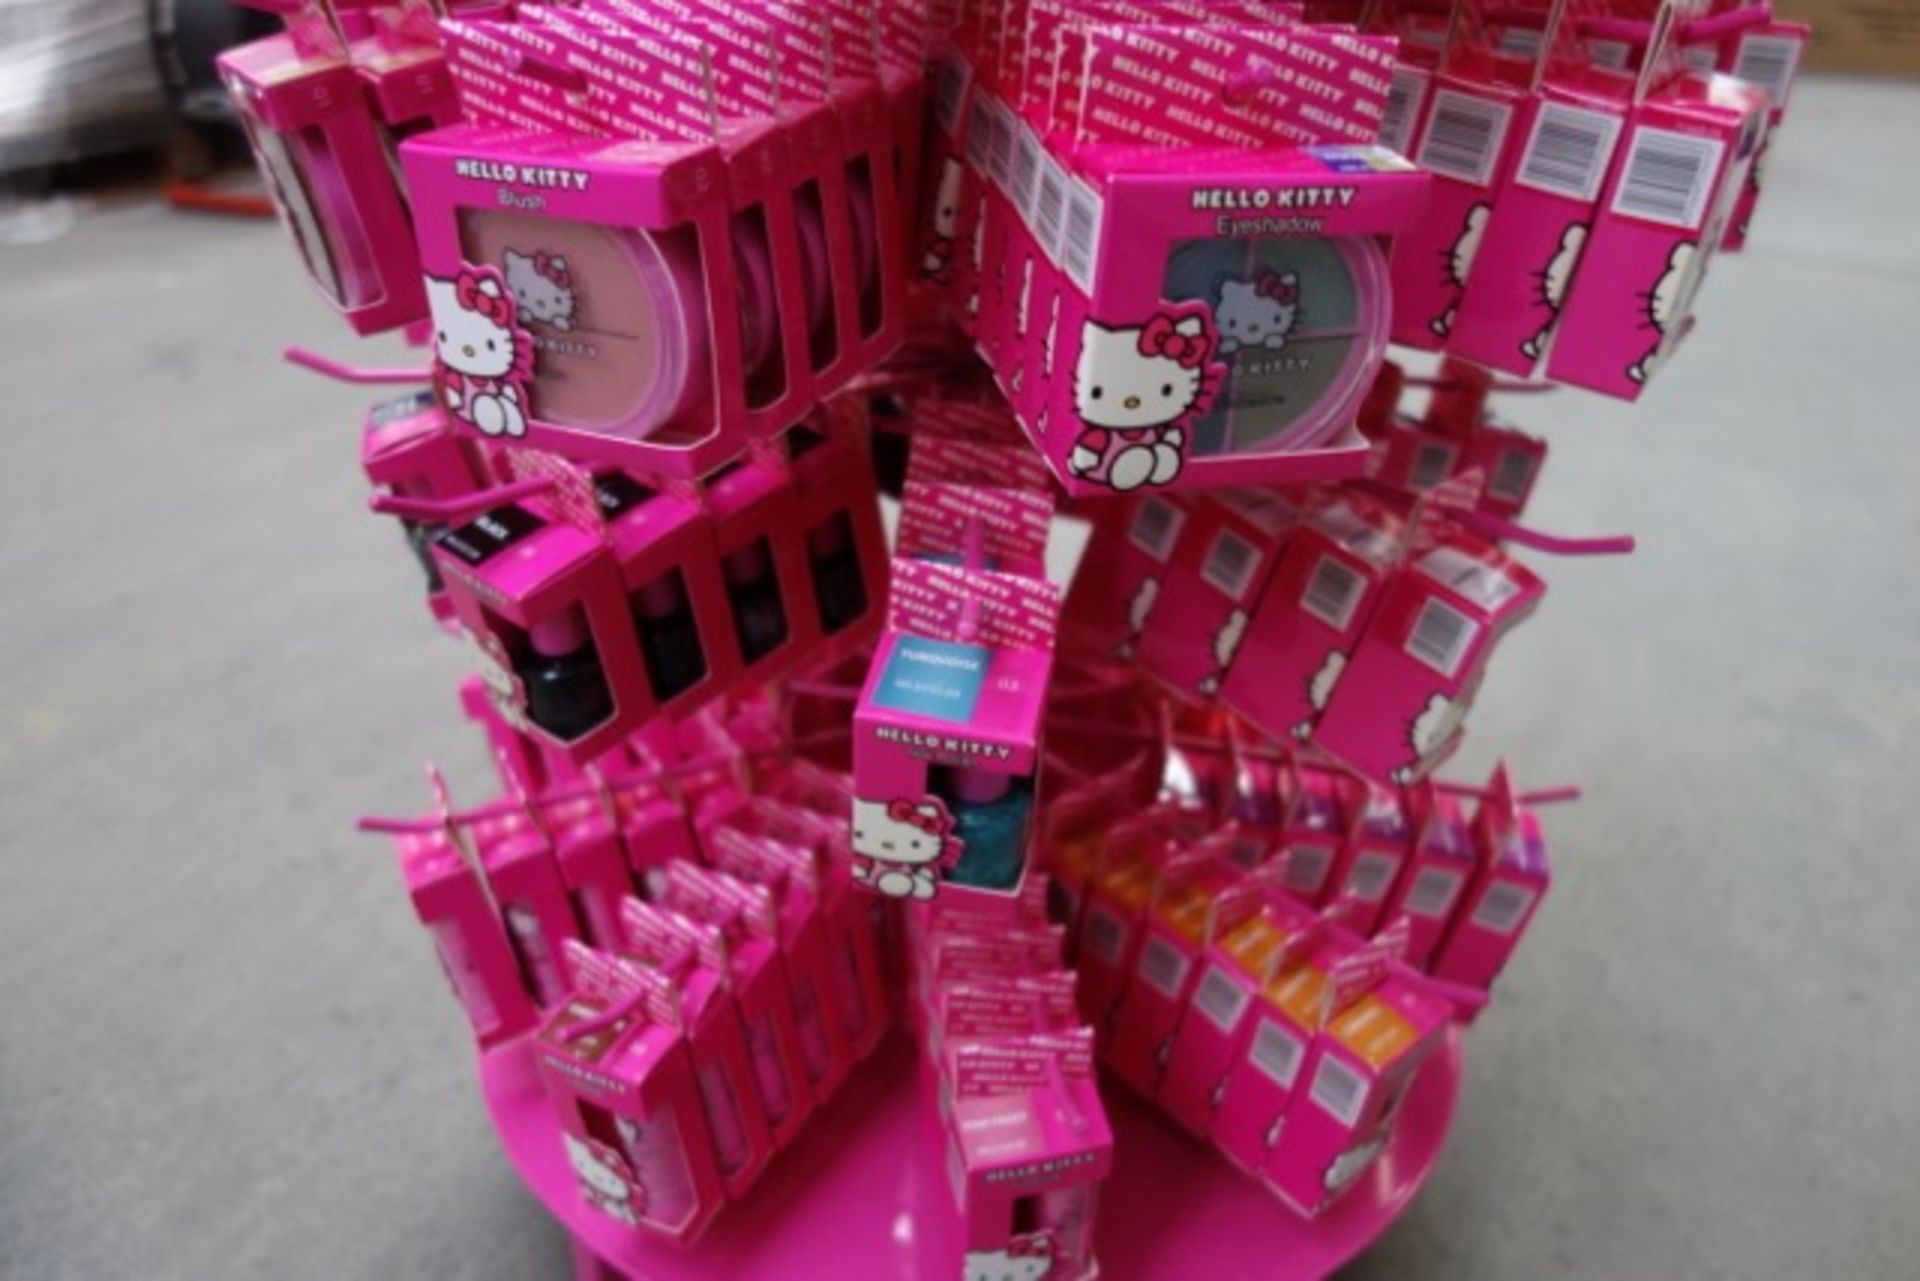 Display Stand Containing Approx. 240 Pieces of Hello Kitty Cosmetics - each with a RRP of £3.50 - Image 6 of 9